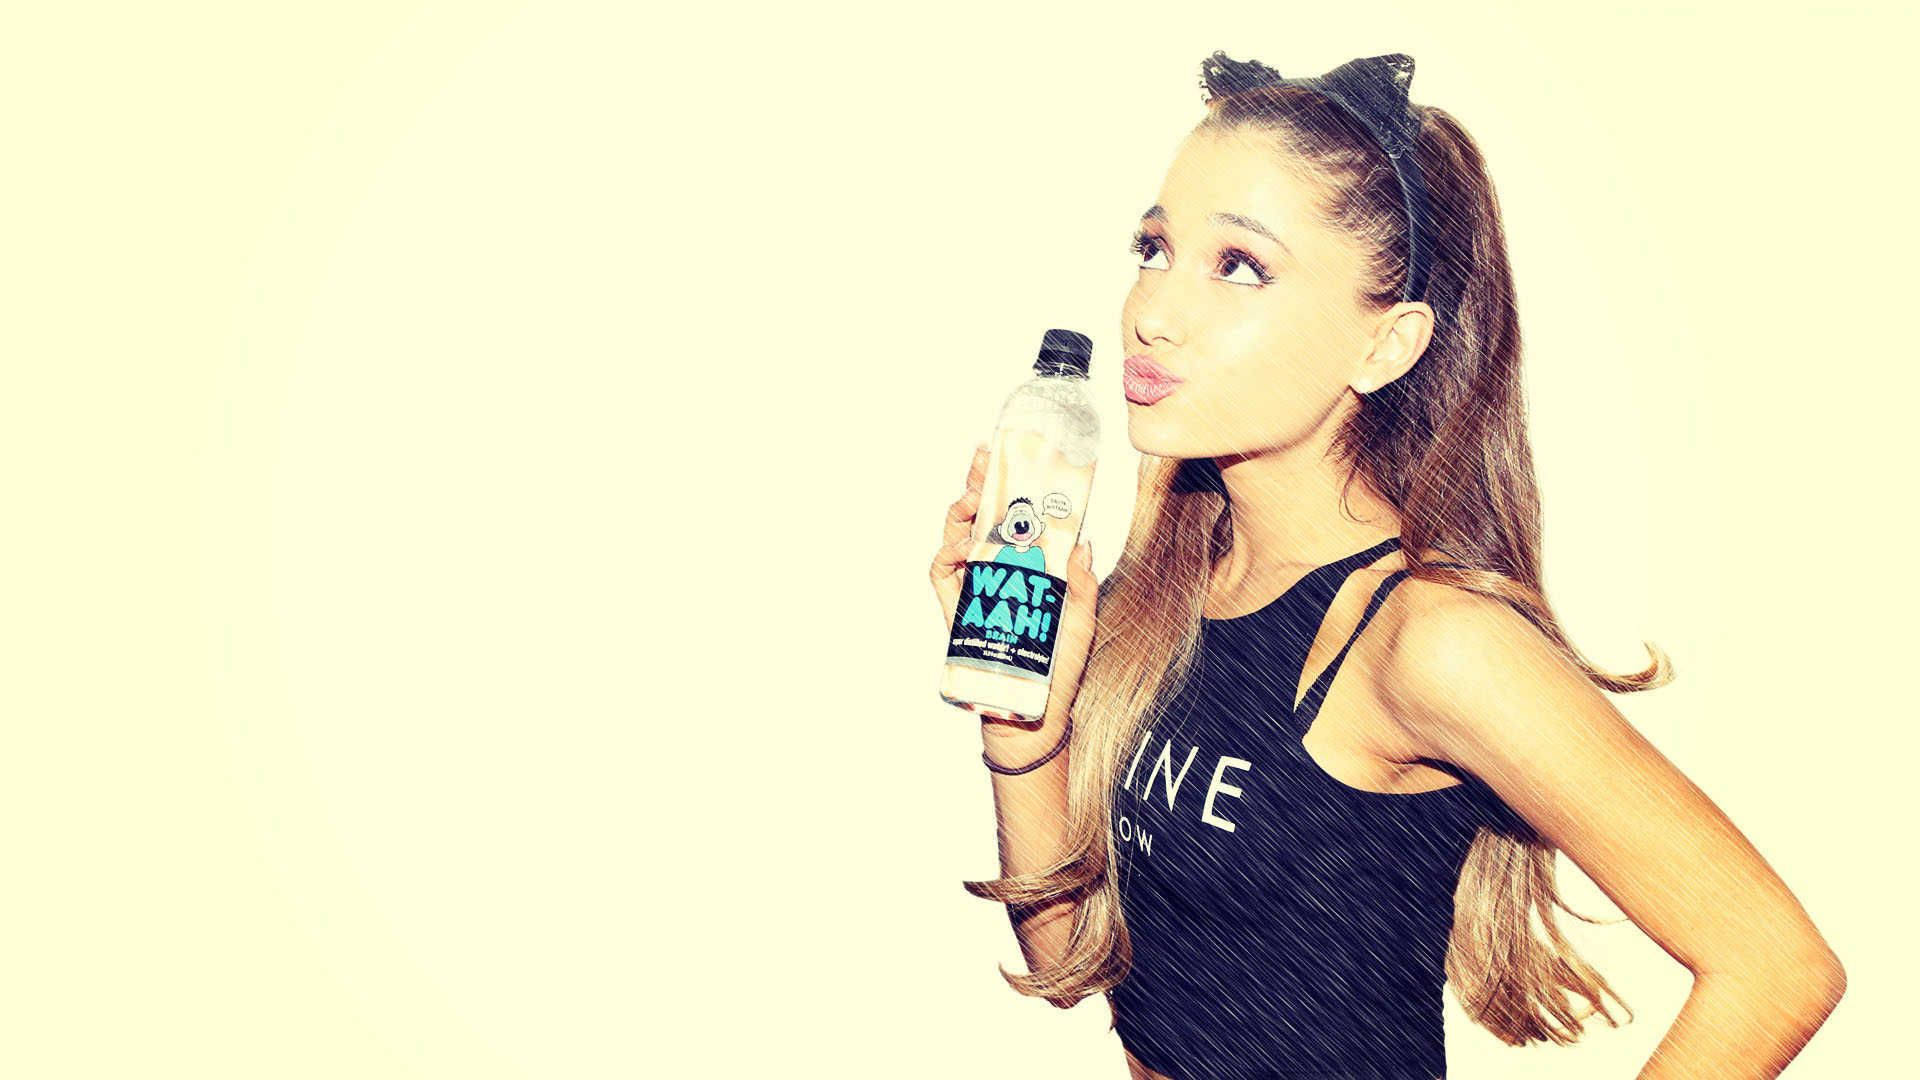 Ariana Grande 1920X1080 Wallpaper and Background Image